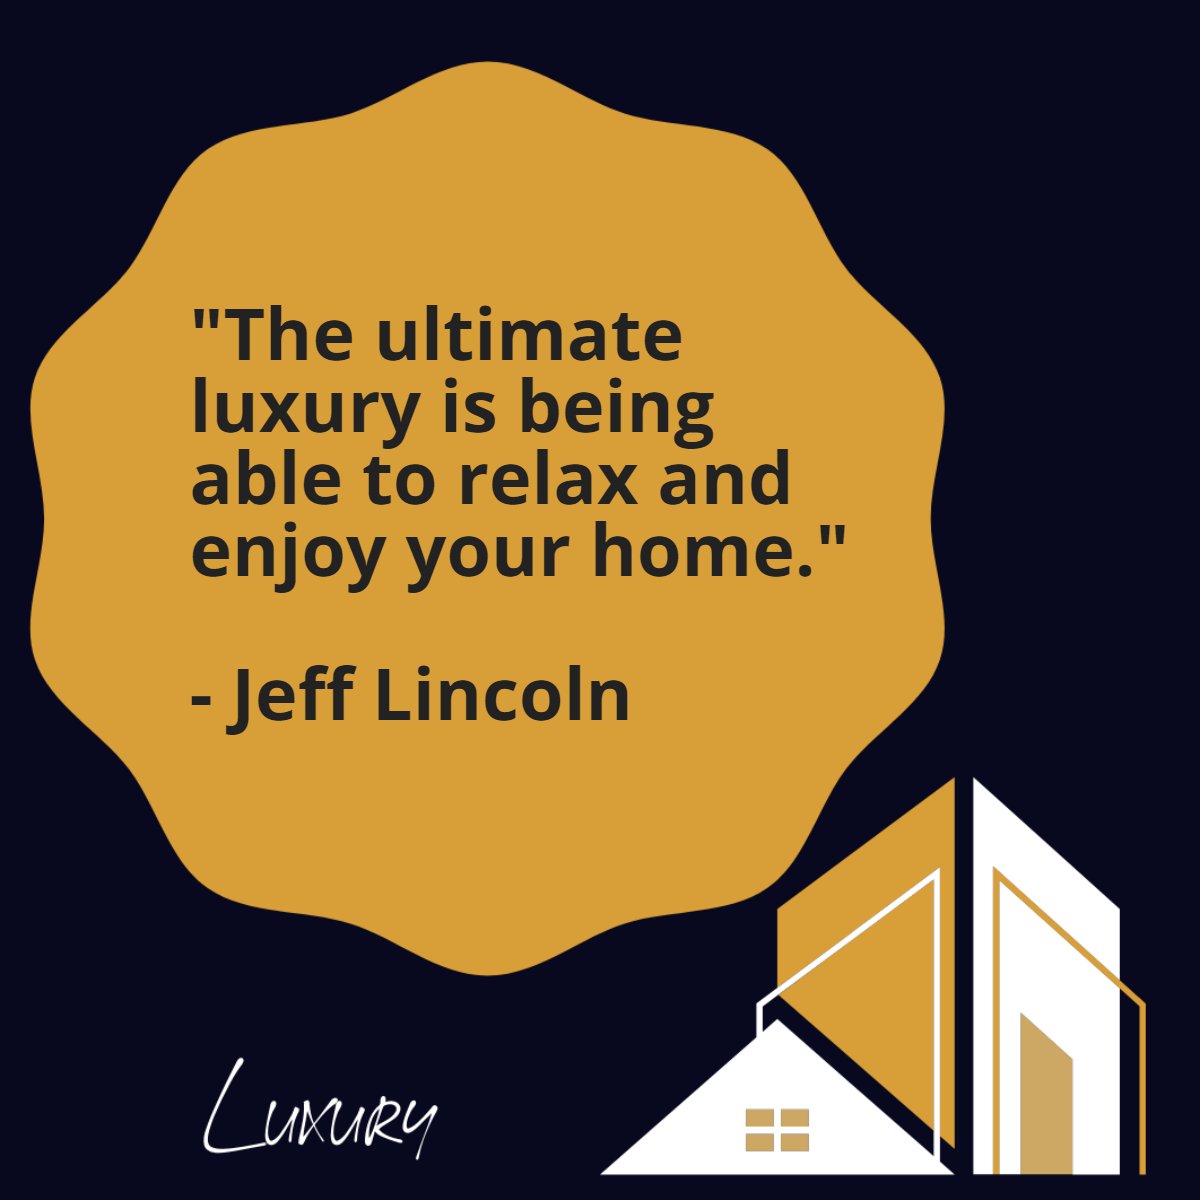 'The ultimate luxury is being able to relax and enjoy your home'
― Jeff Lincoln 📖

#luxurylifestyle #luxury #lovemyhome #home #lifestyle #jefflincoln #quote #quoteoftheday✏️ 
 #naplesrealestate #naplesrealtor #FortMyersrealestate #newhome #househunting